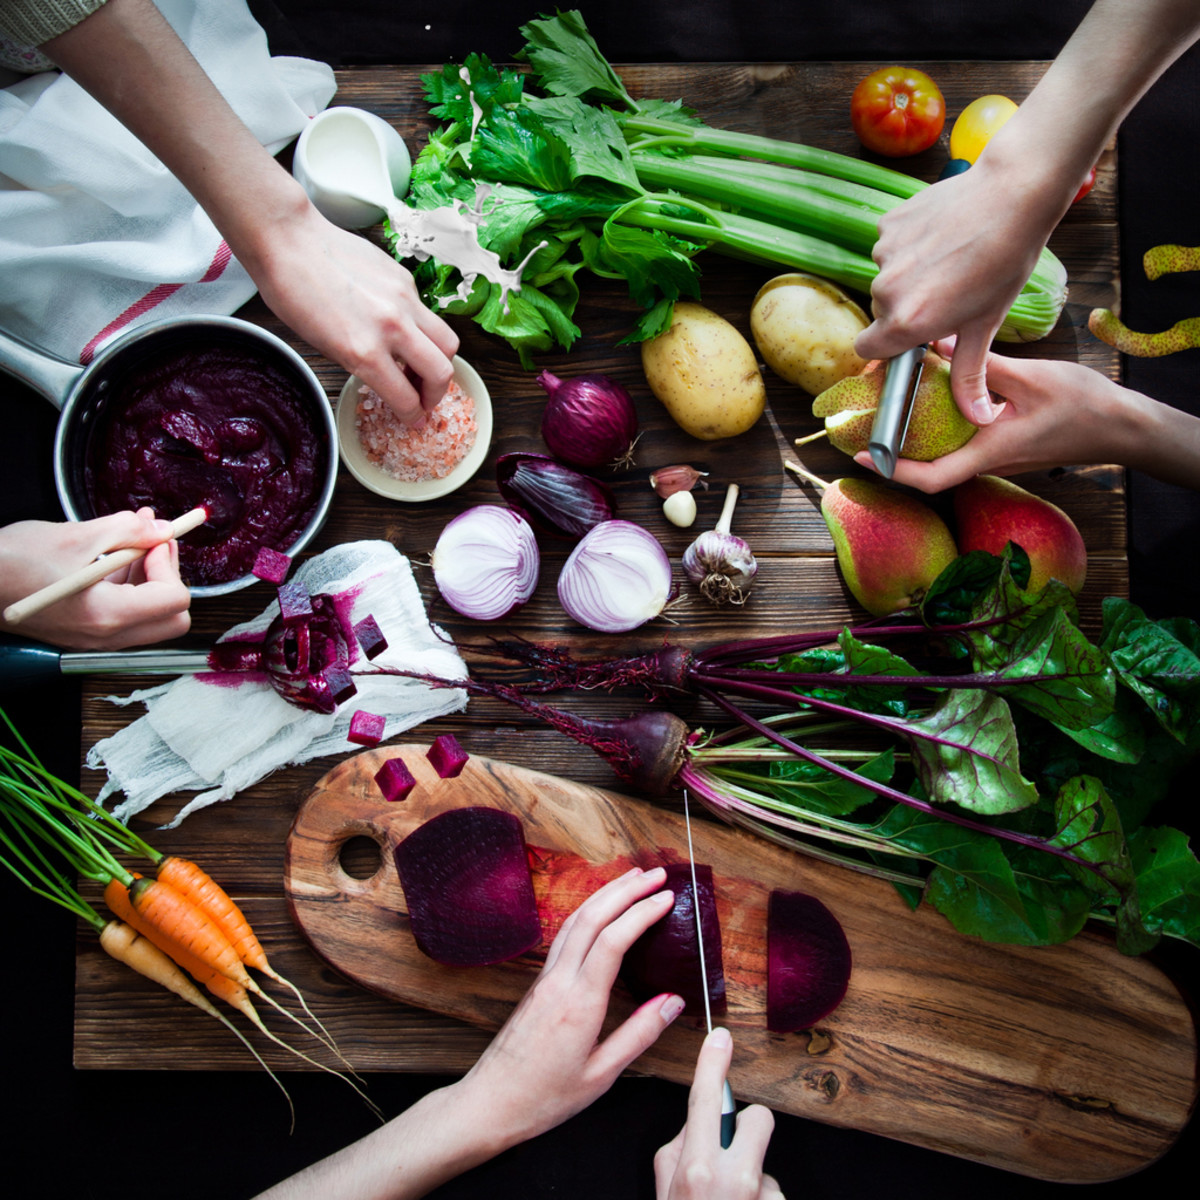 Plant-Based Meal Kit Leader Purple Carrot Partners with Forks Over Knives Media Company